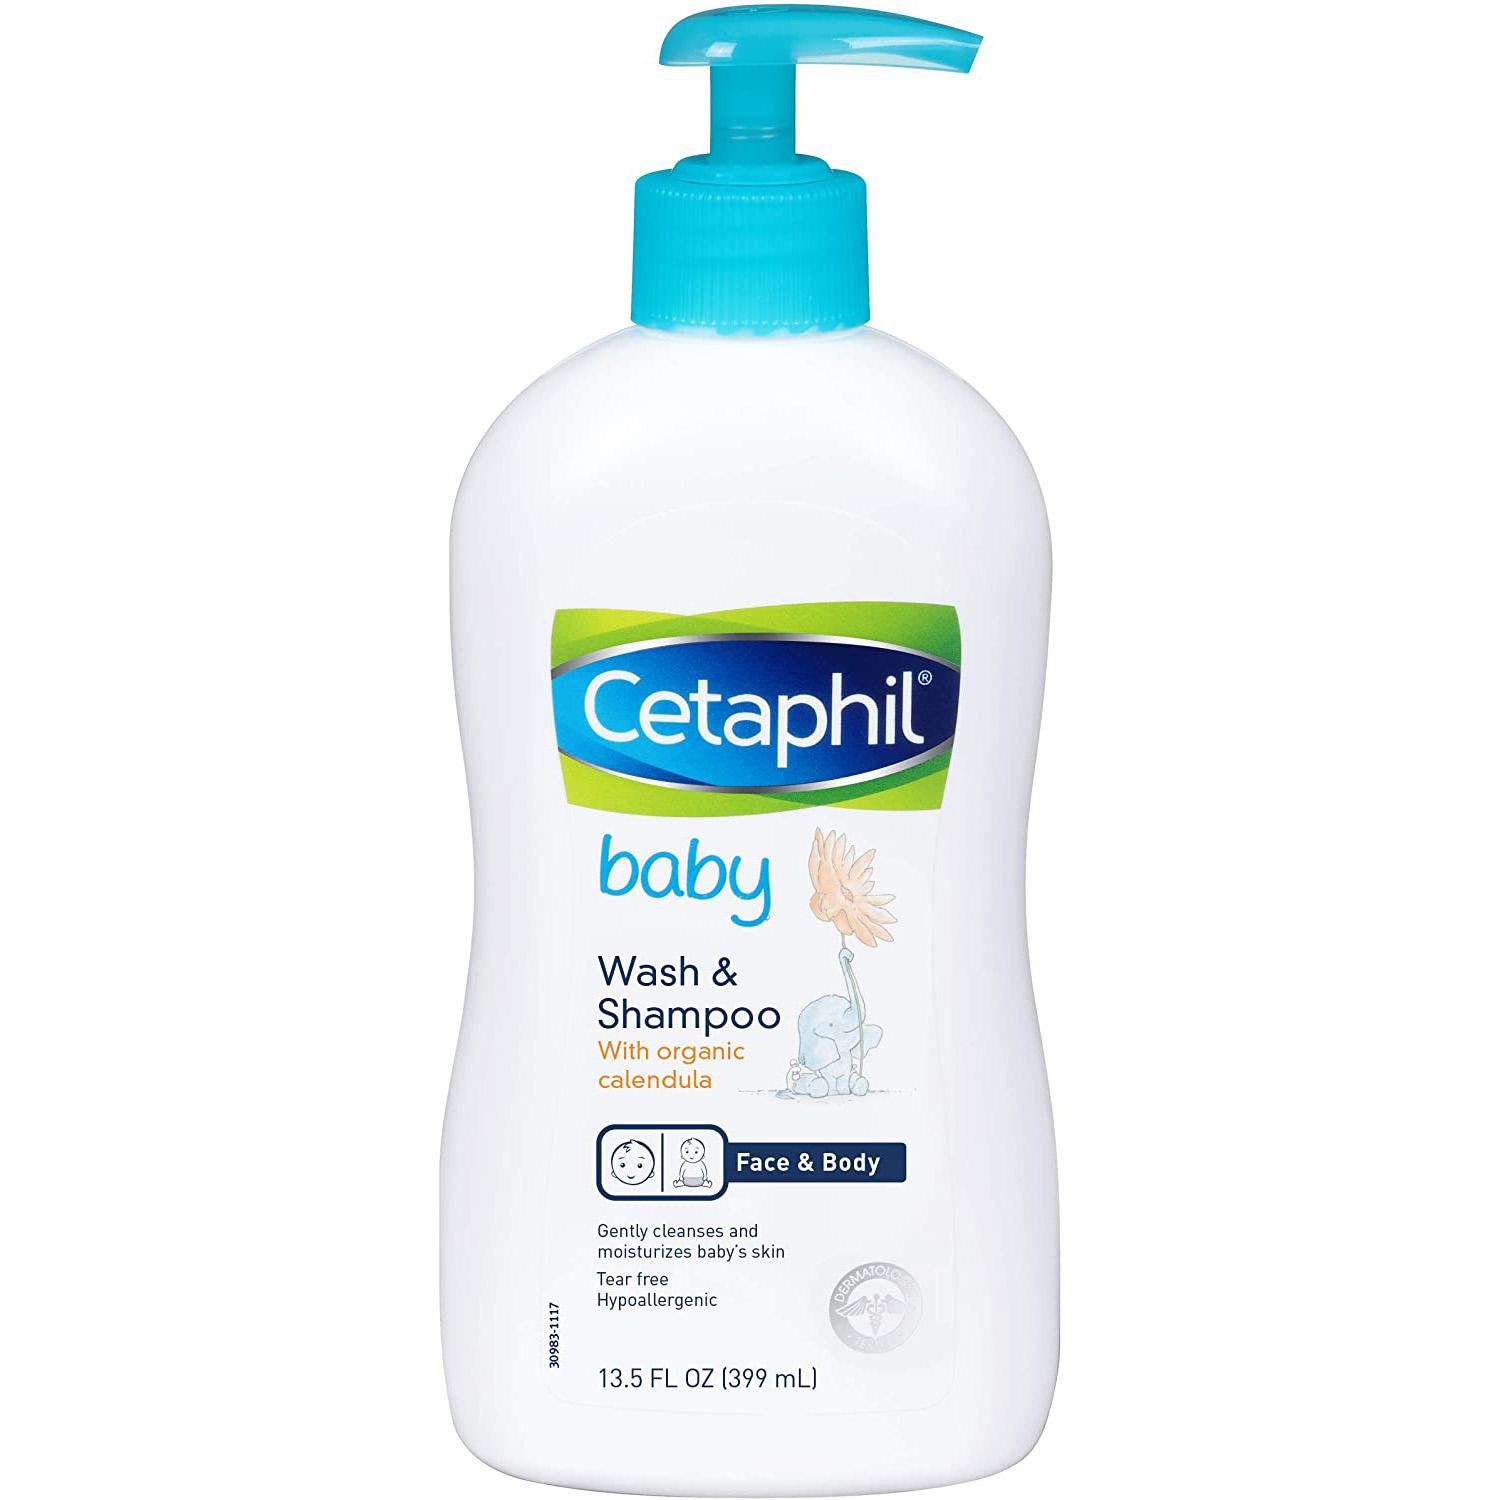 13Oz Cetaphil Baby Wash and Shampoo for $4.21 Shipped